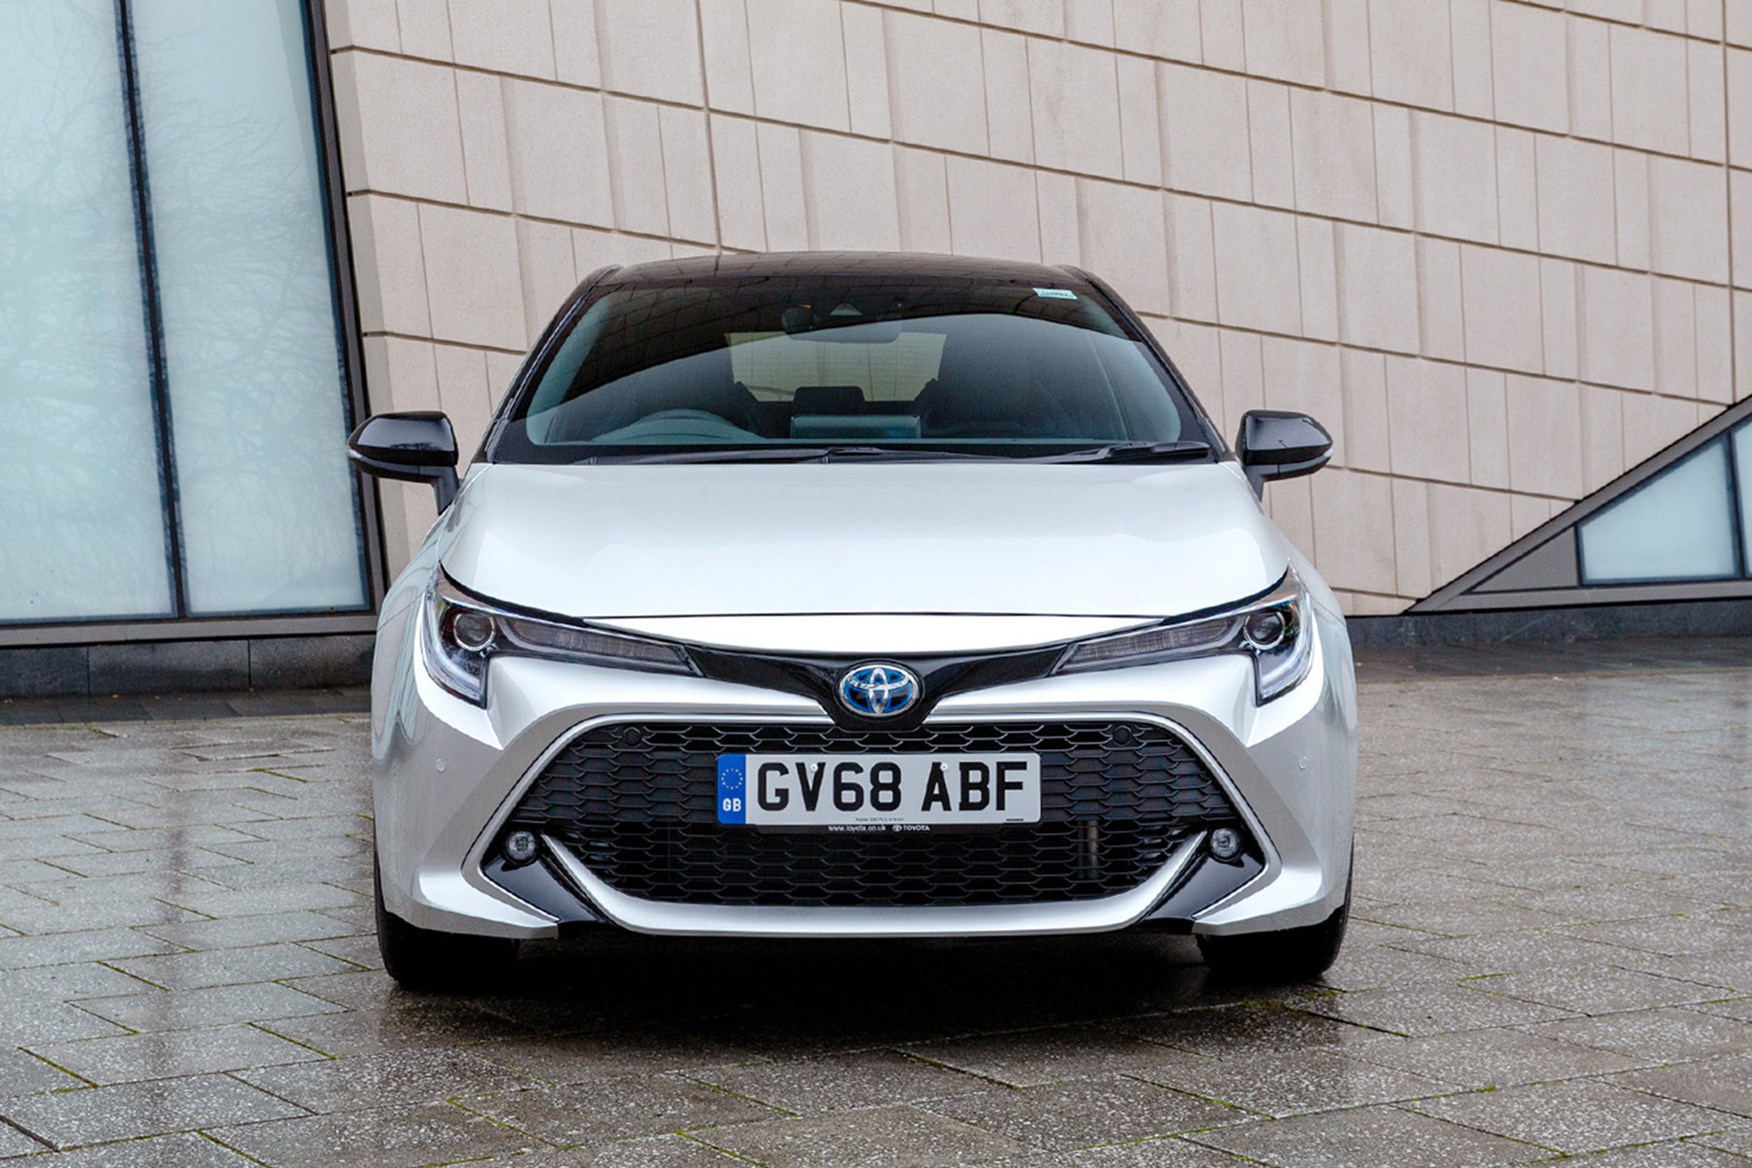 No diesel here: Toyota Corolla returns with more hybrid options than